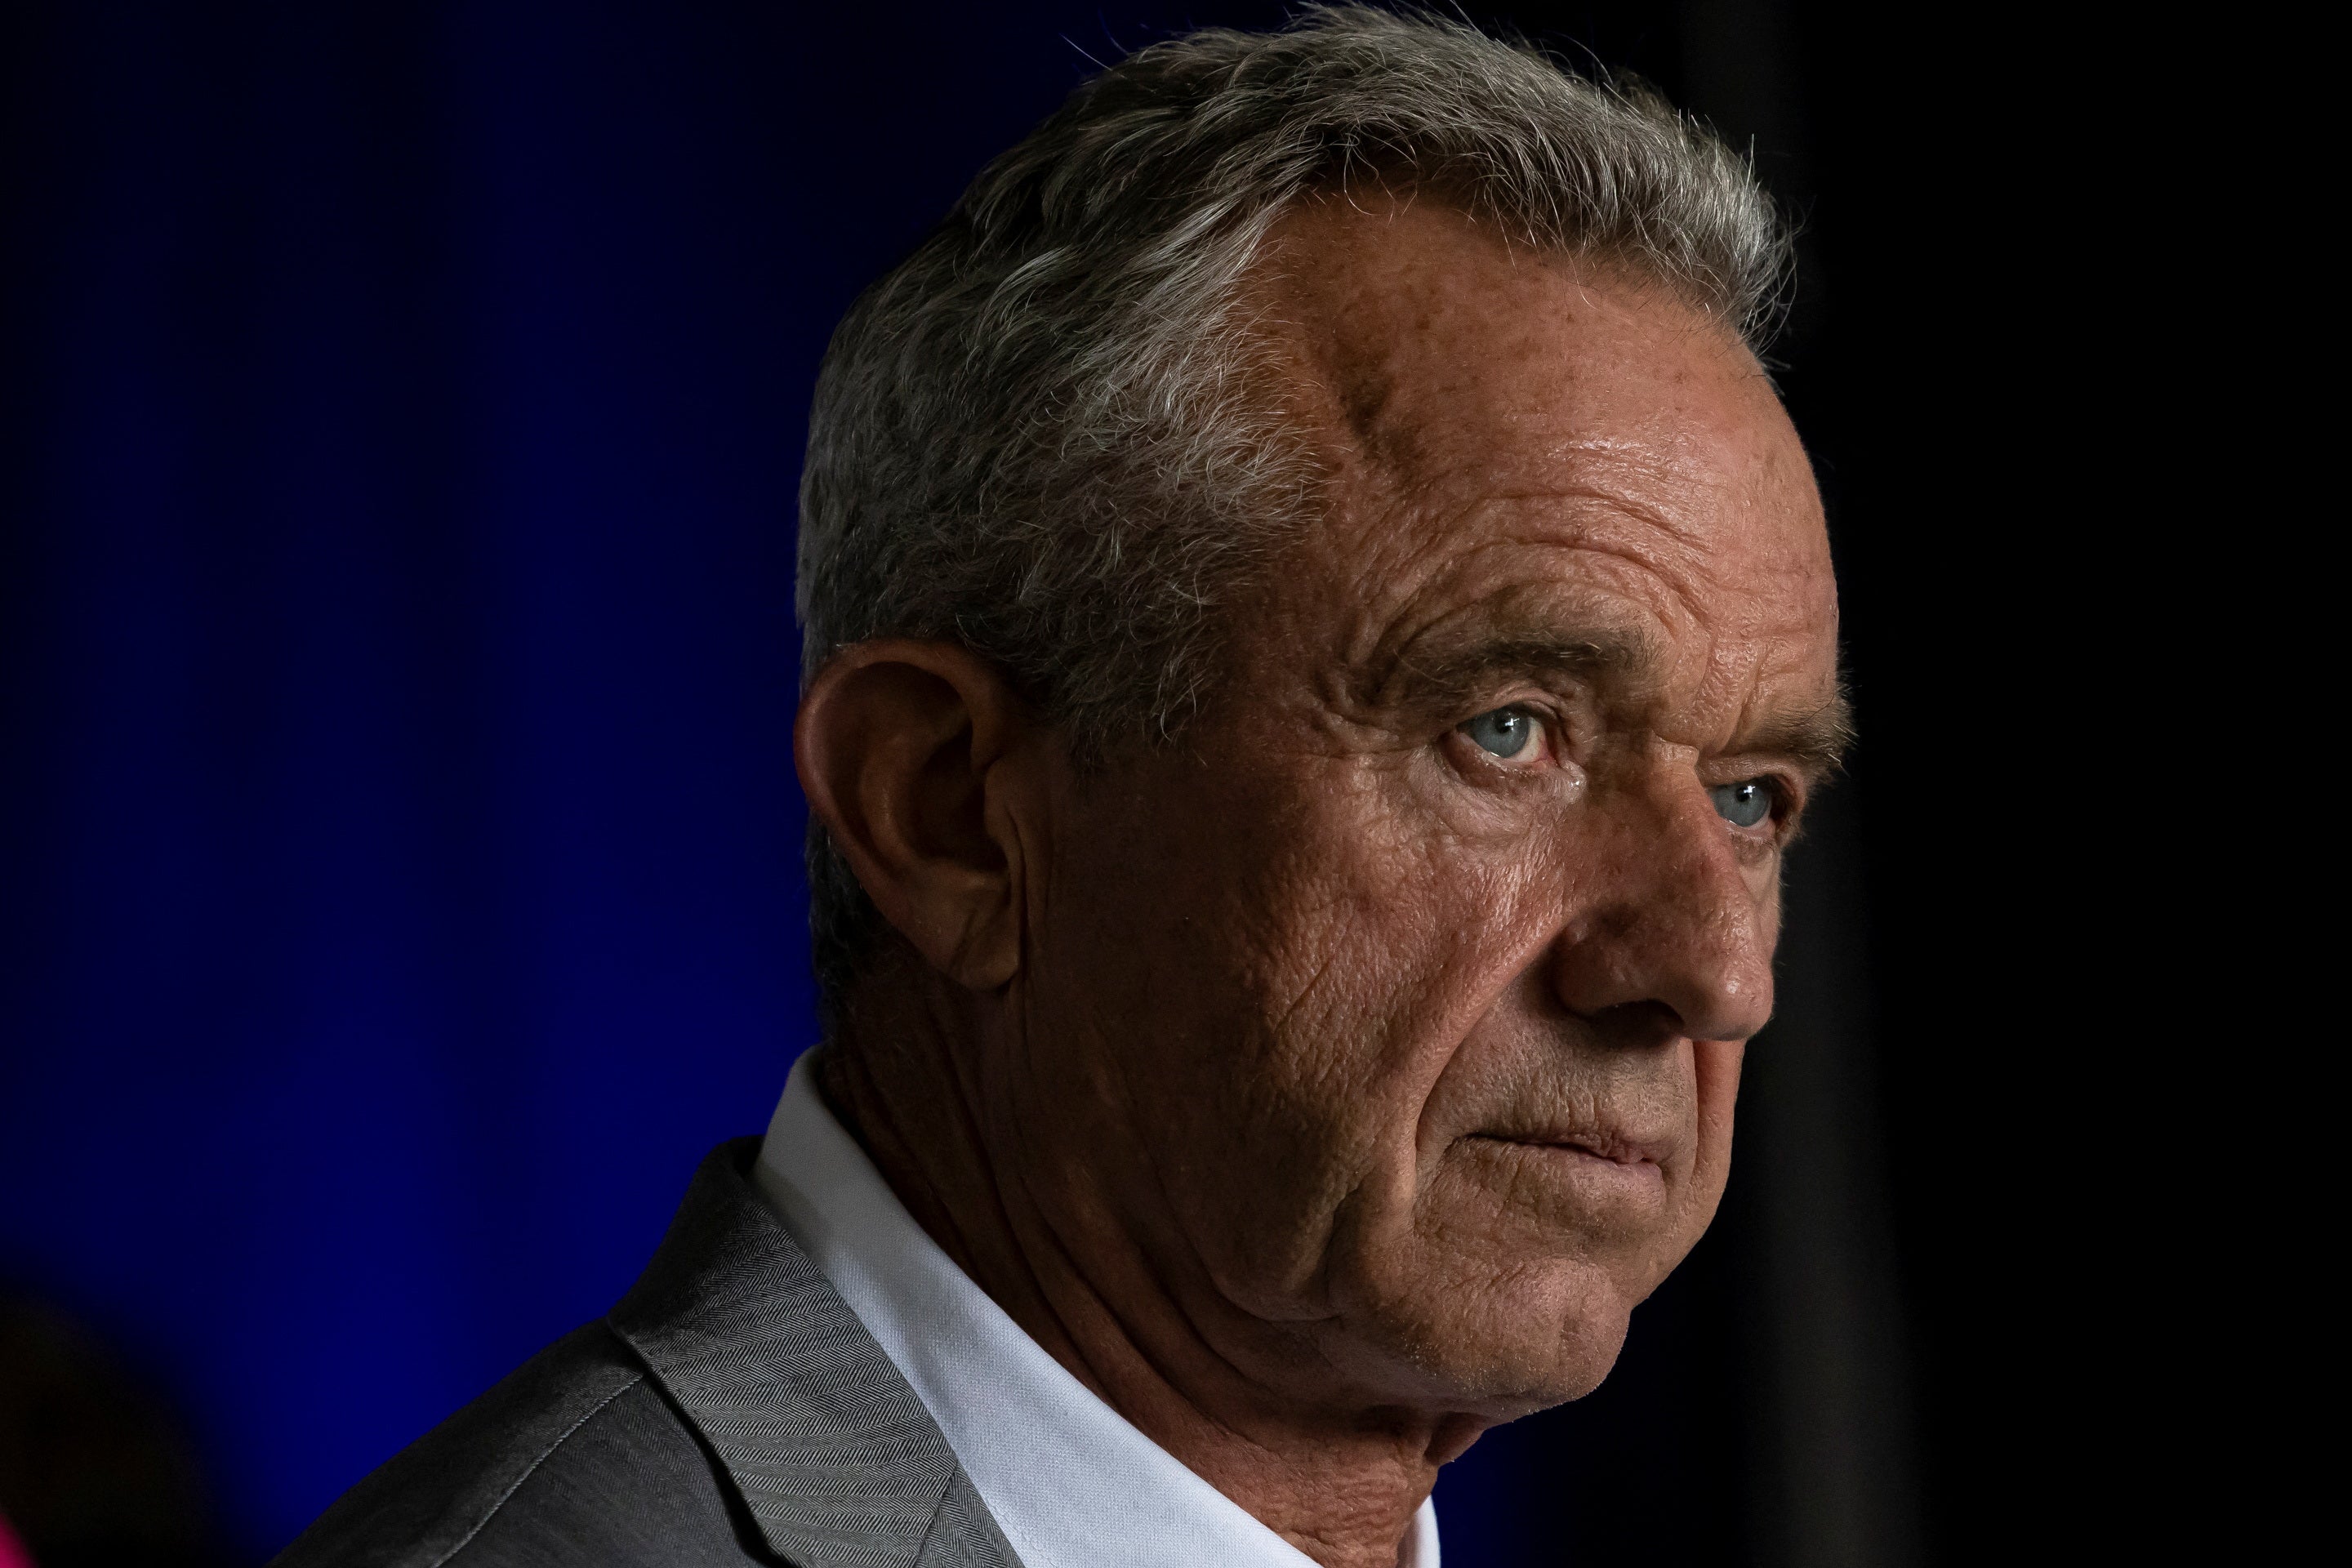 Robert F Kennedy Jr takes questions from reporters during a campaign event in Aurora, Colorado